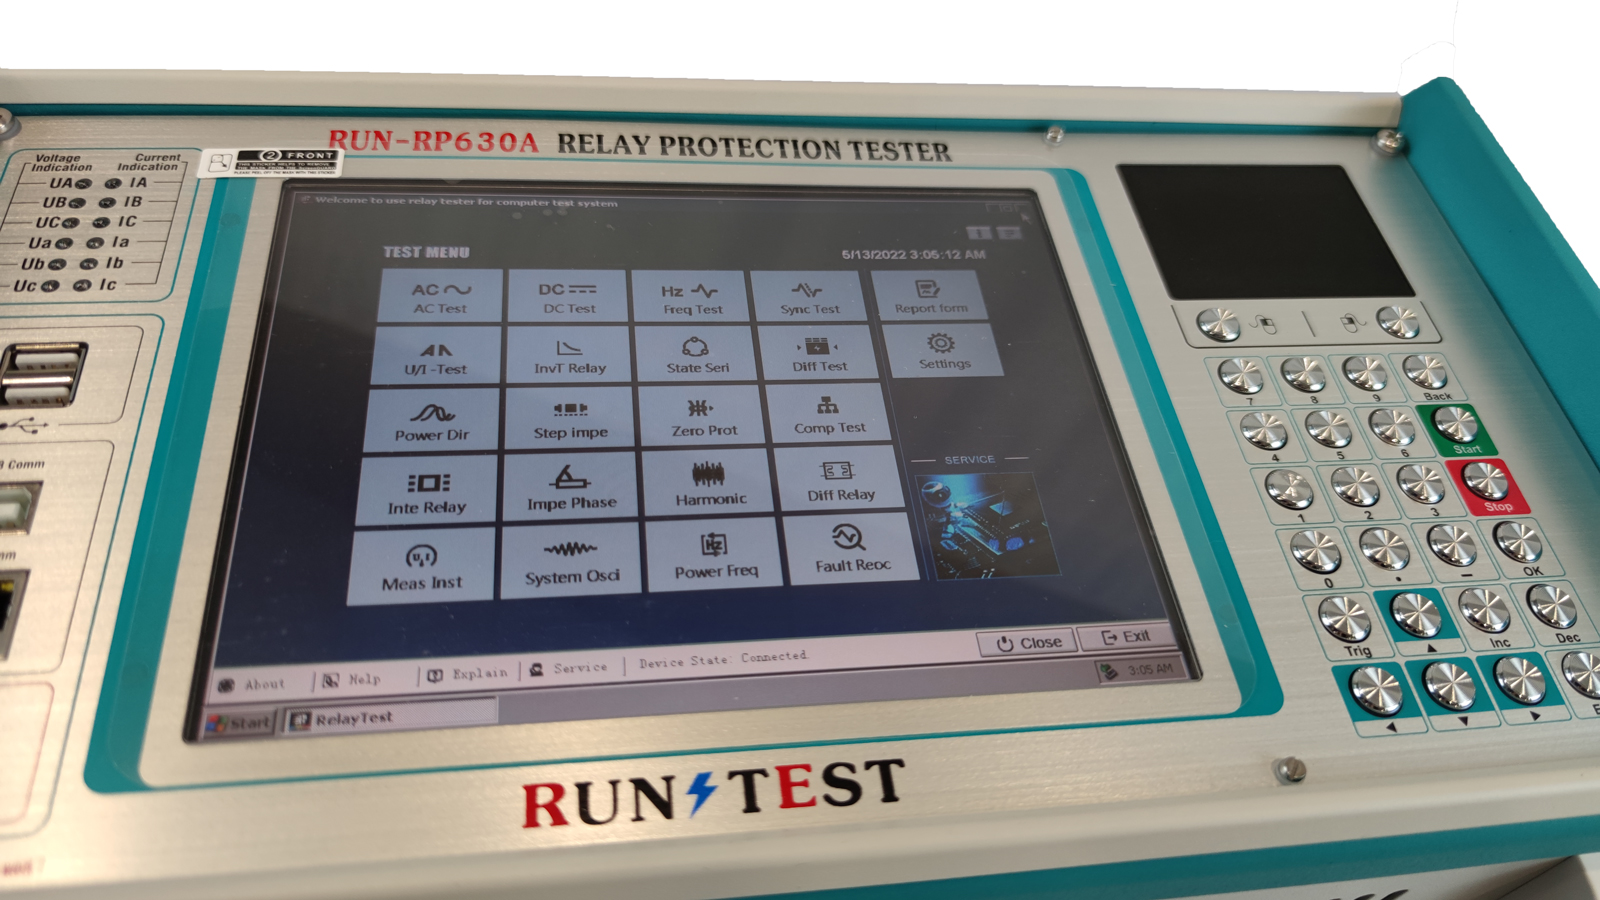 https://www.voltage-tester.com/6-phase-secondary-injection-protection-relay-tester-with-ce-certification-product/